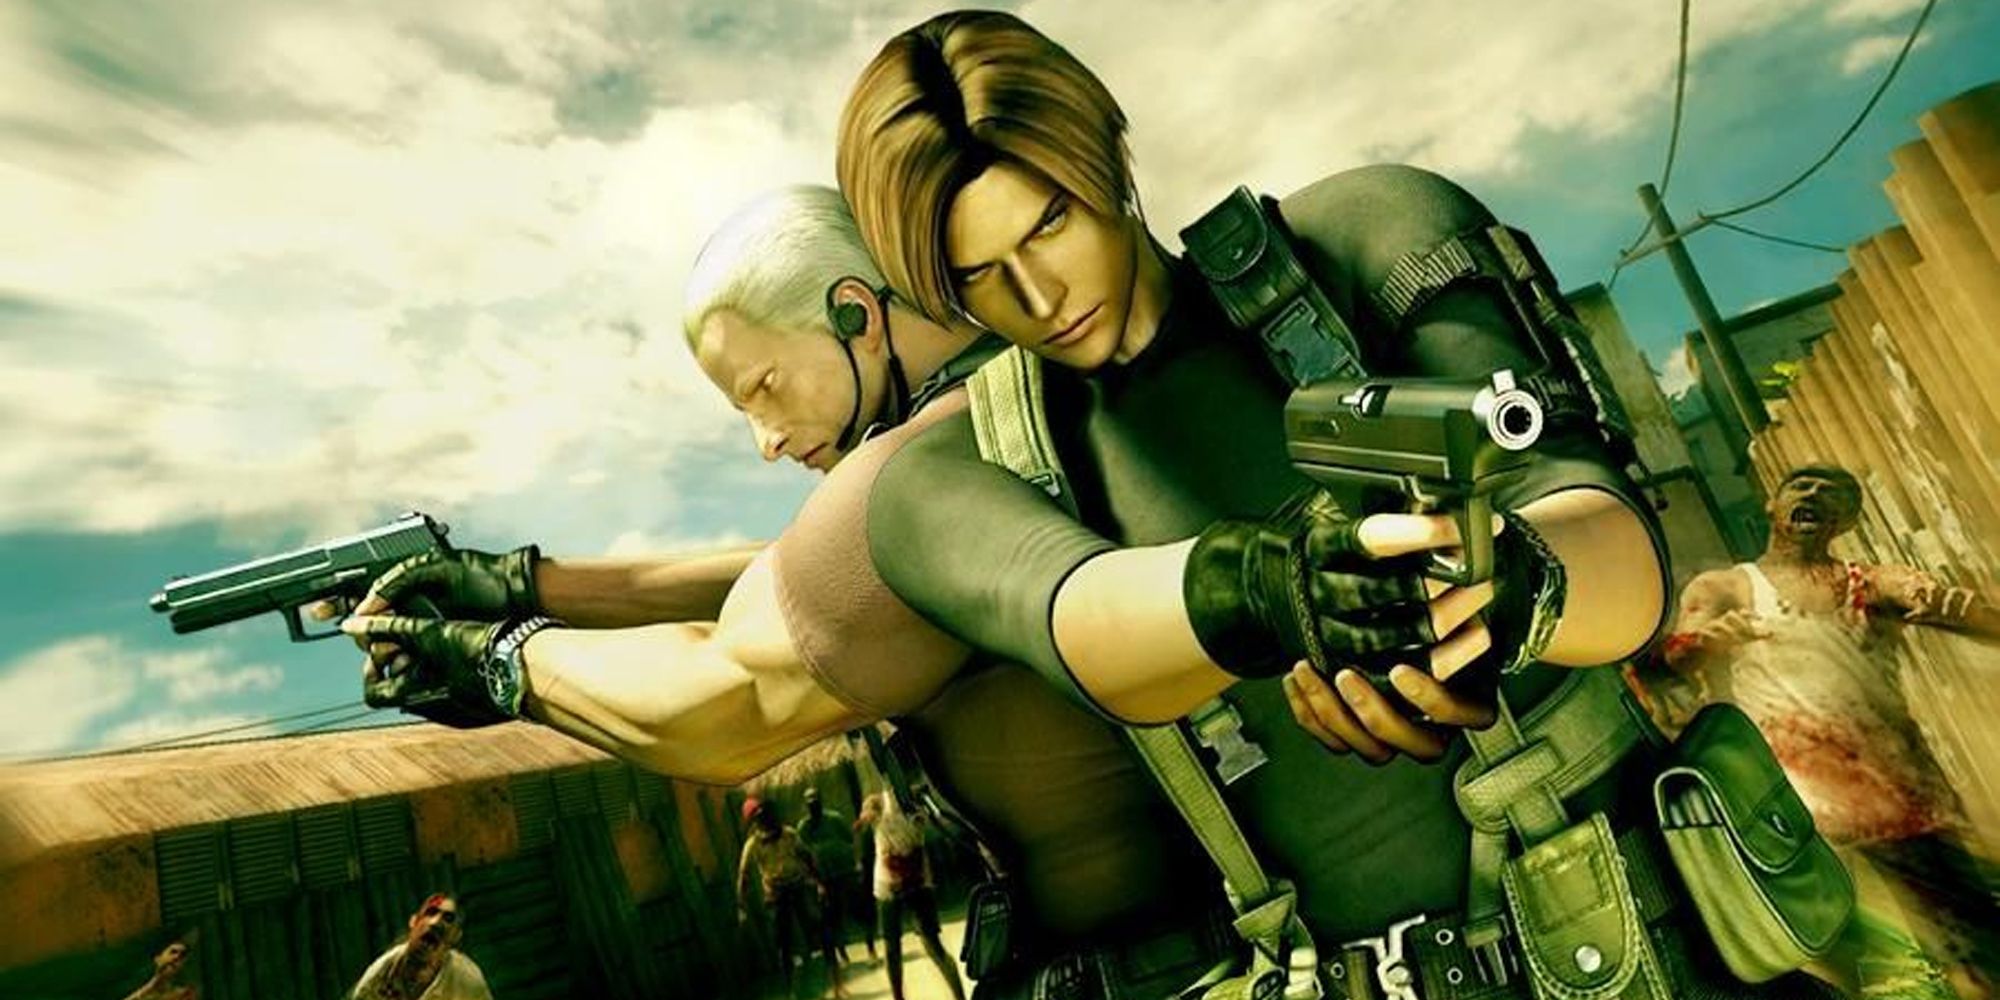 Resident Evil: Darkside Chronicles key art showing Leon and Krauser back-to-back fighting zombies